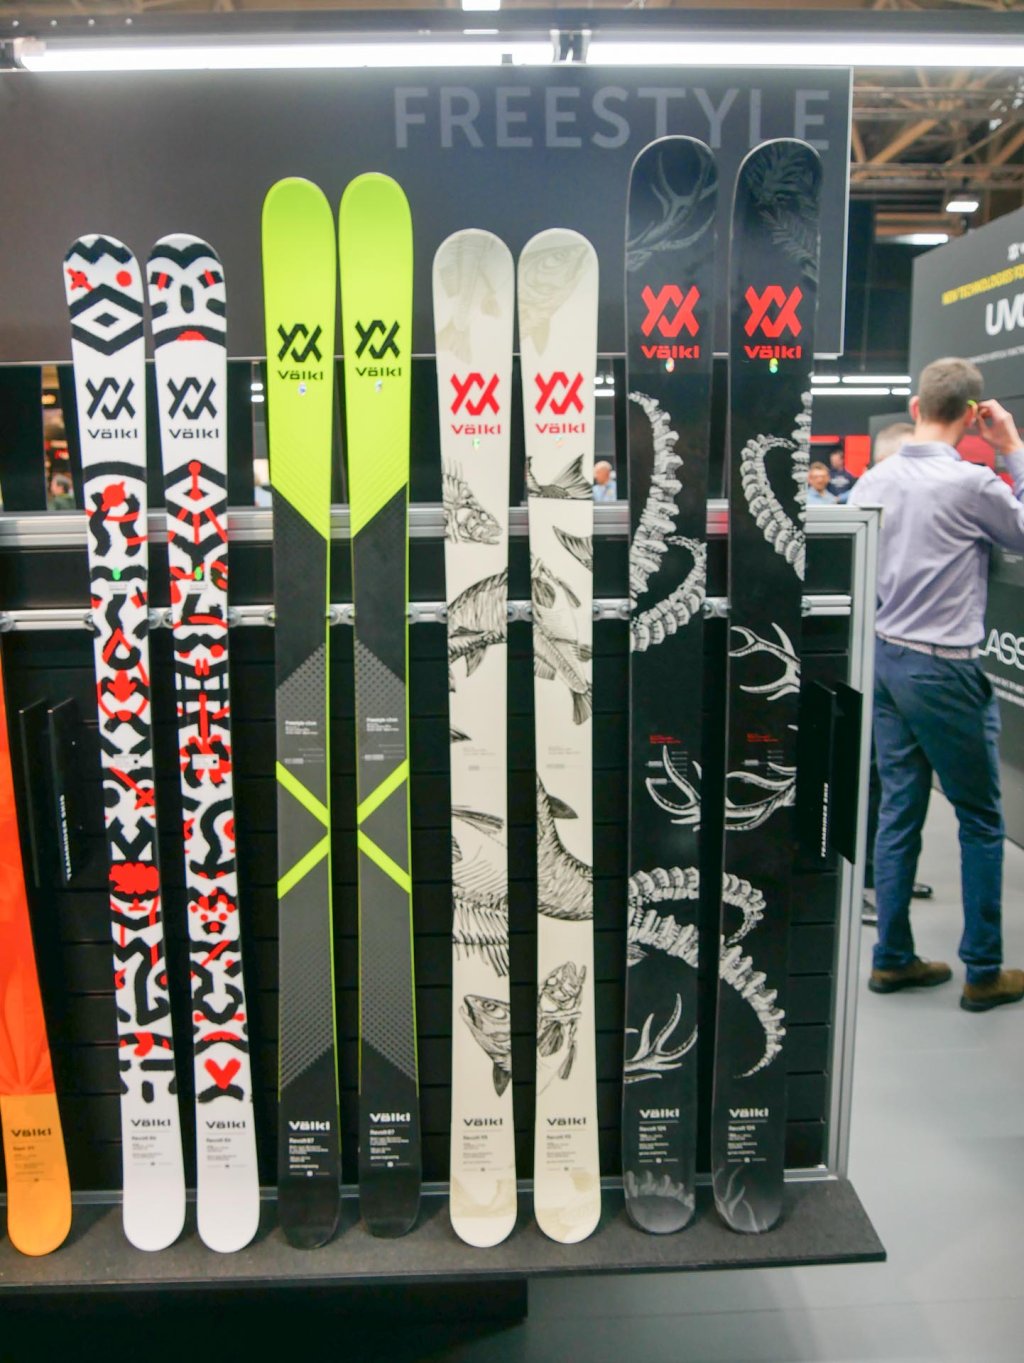 Freestyle skis unchanged except for the design